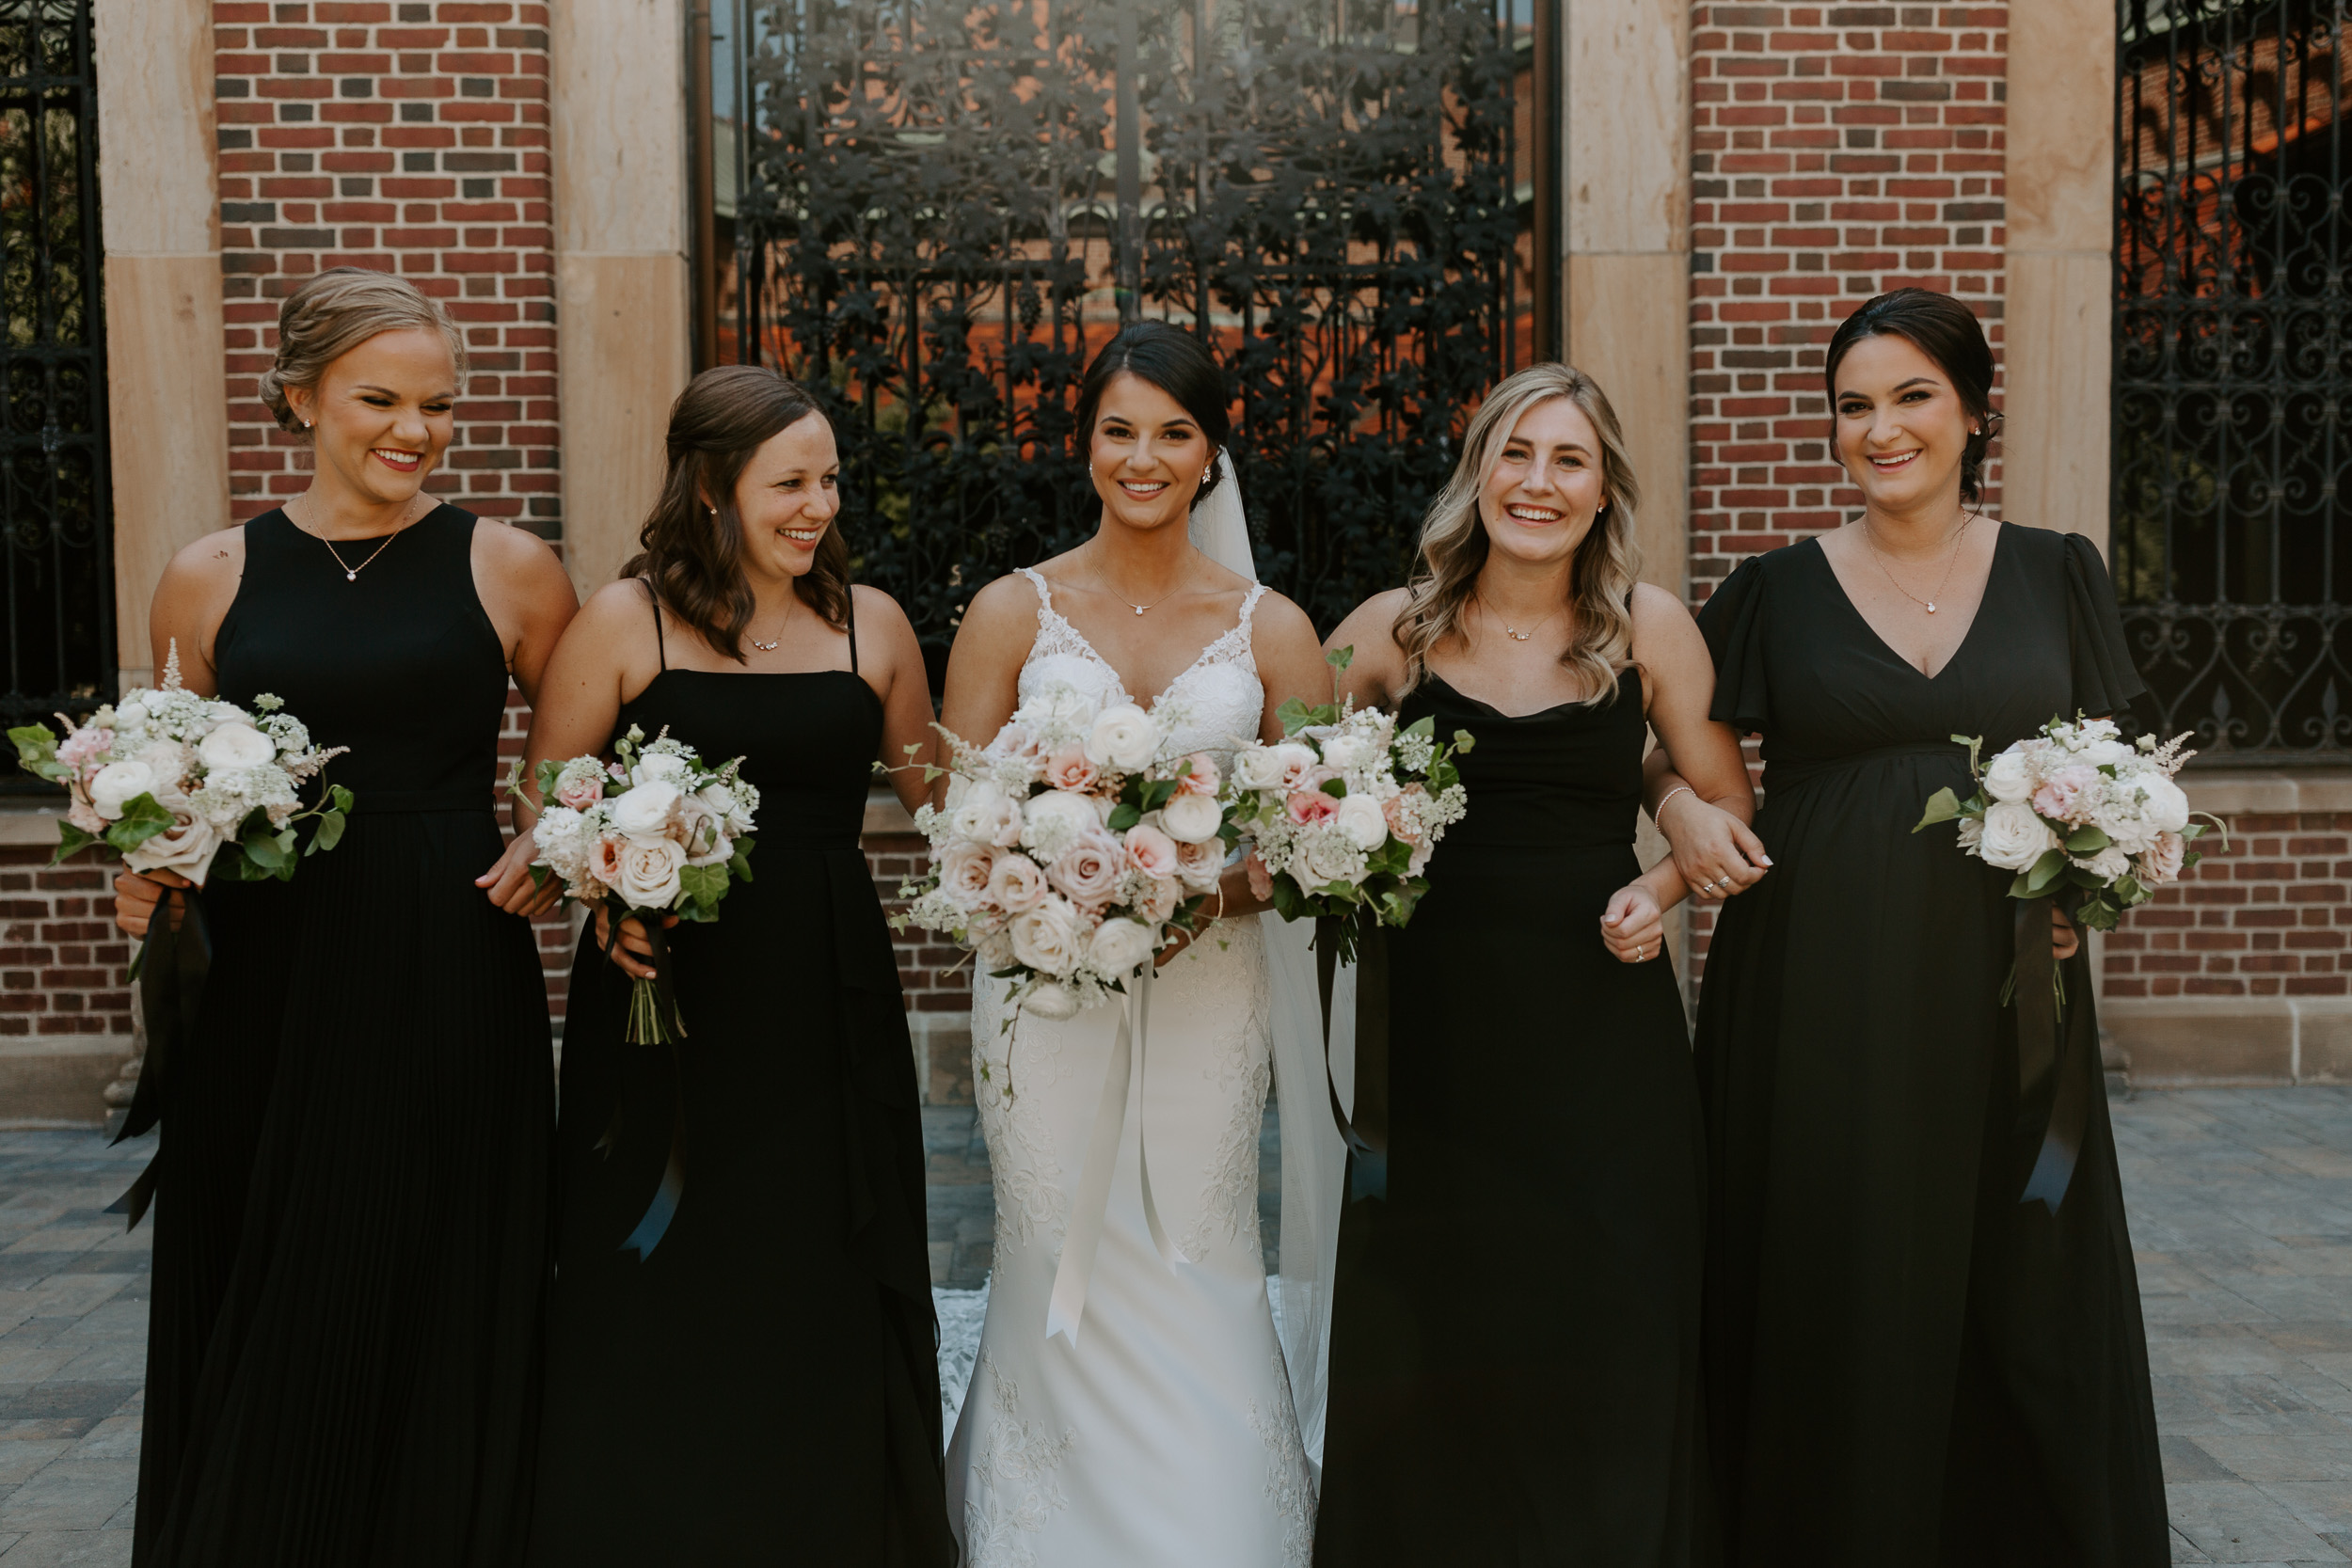 Bride with bridesmaids at Dayton Art Institute Wedding | Bridal party photos with black bridesmaids dresses